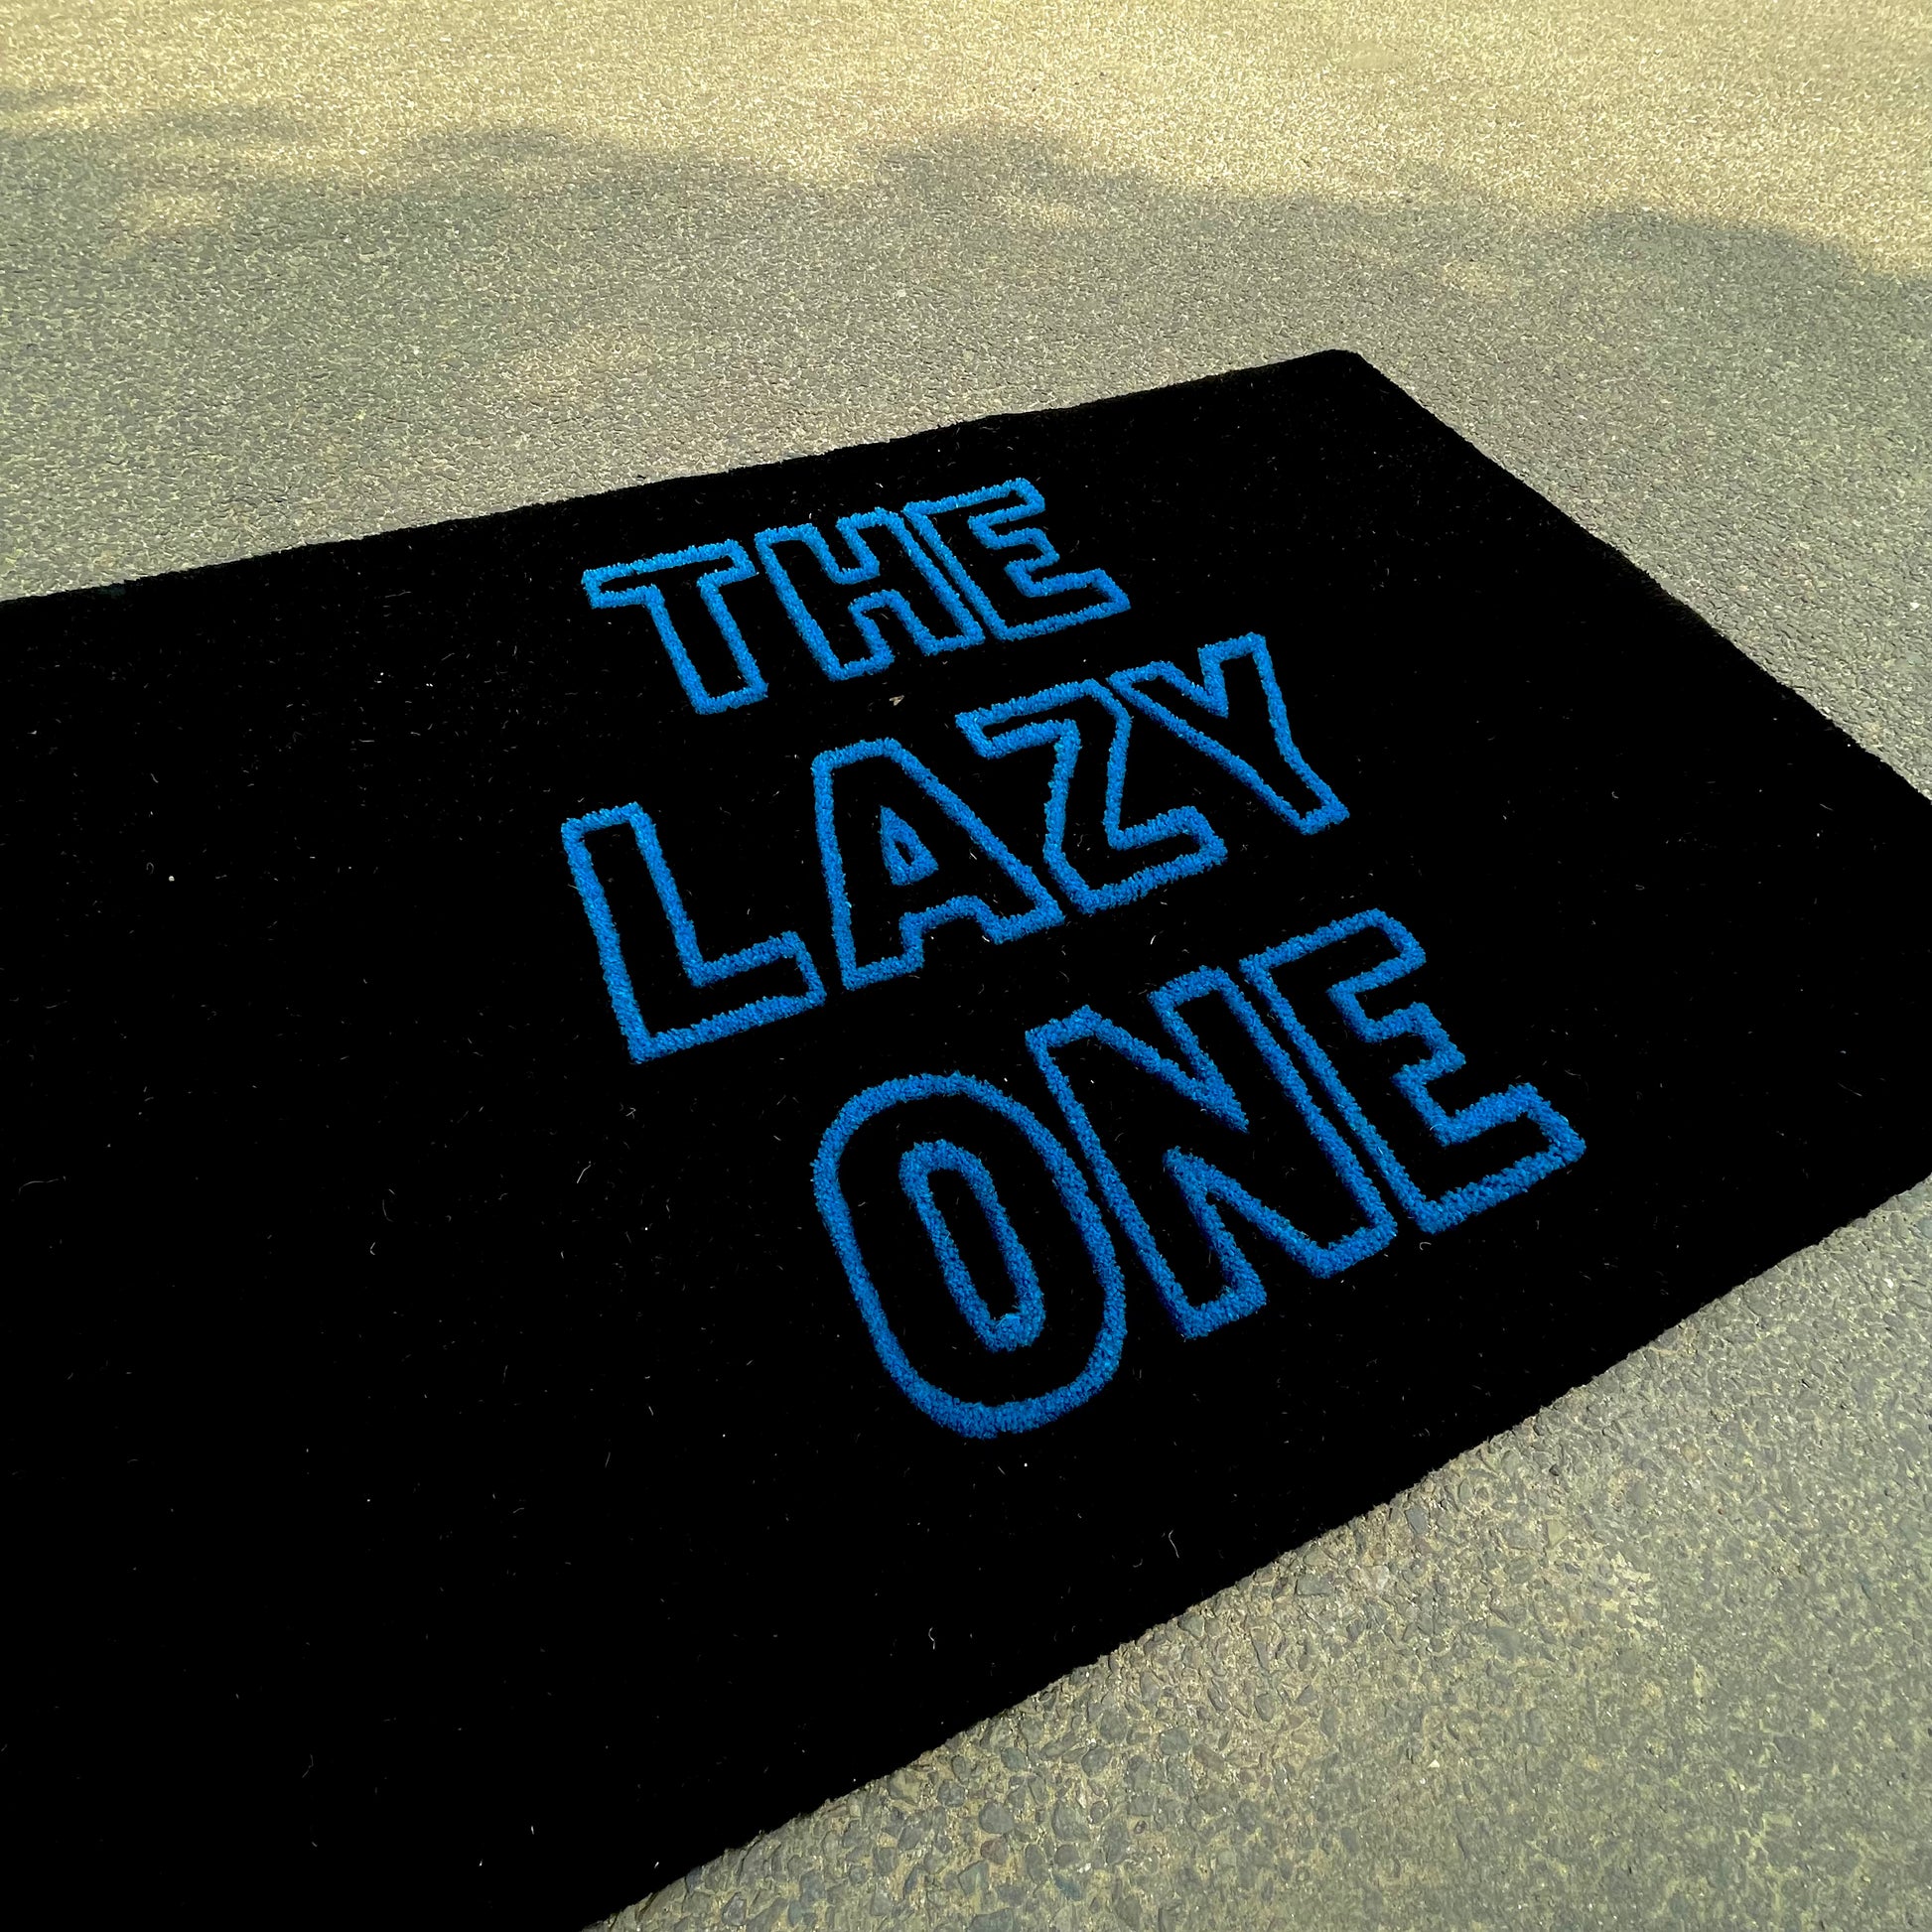 the lazy one rug